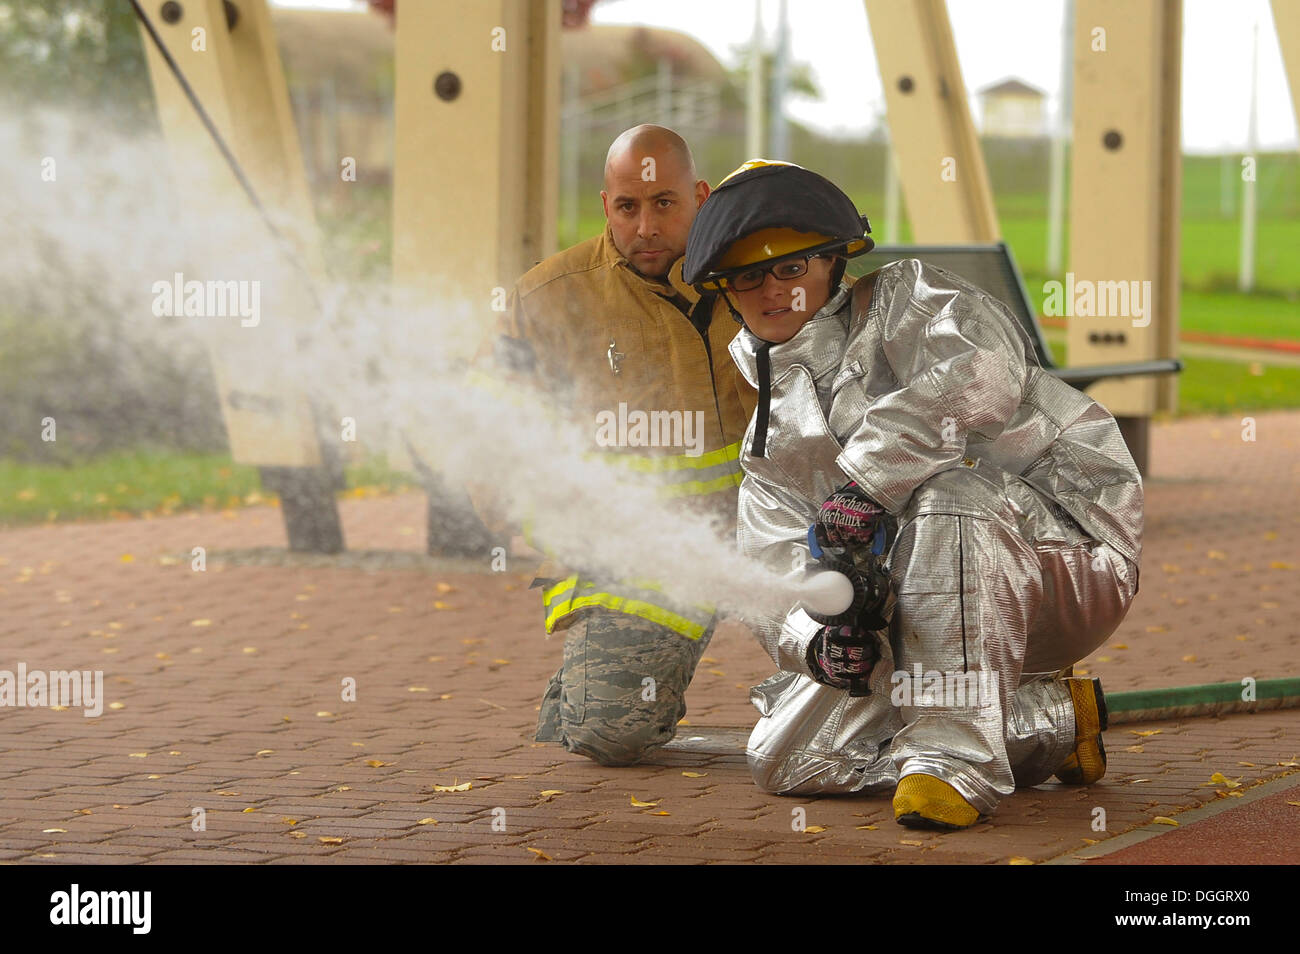 SPANGDHALEM AIR BASE, Germany--U.S. Air Force Senior Airman Katelyn Camacho, a 52nd Equipment Maintenance Squadron phase support member, from Corinth, Miss., uses a fire hose to knock over cones during the Fire Muster competition Oct. 10, 2013. The 52nd E Stock Photo